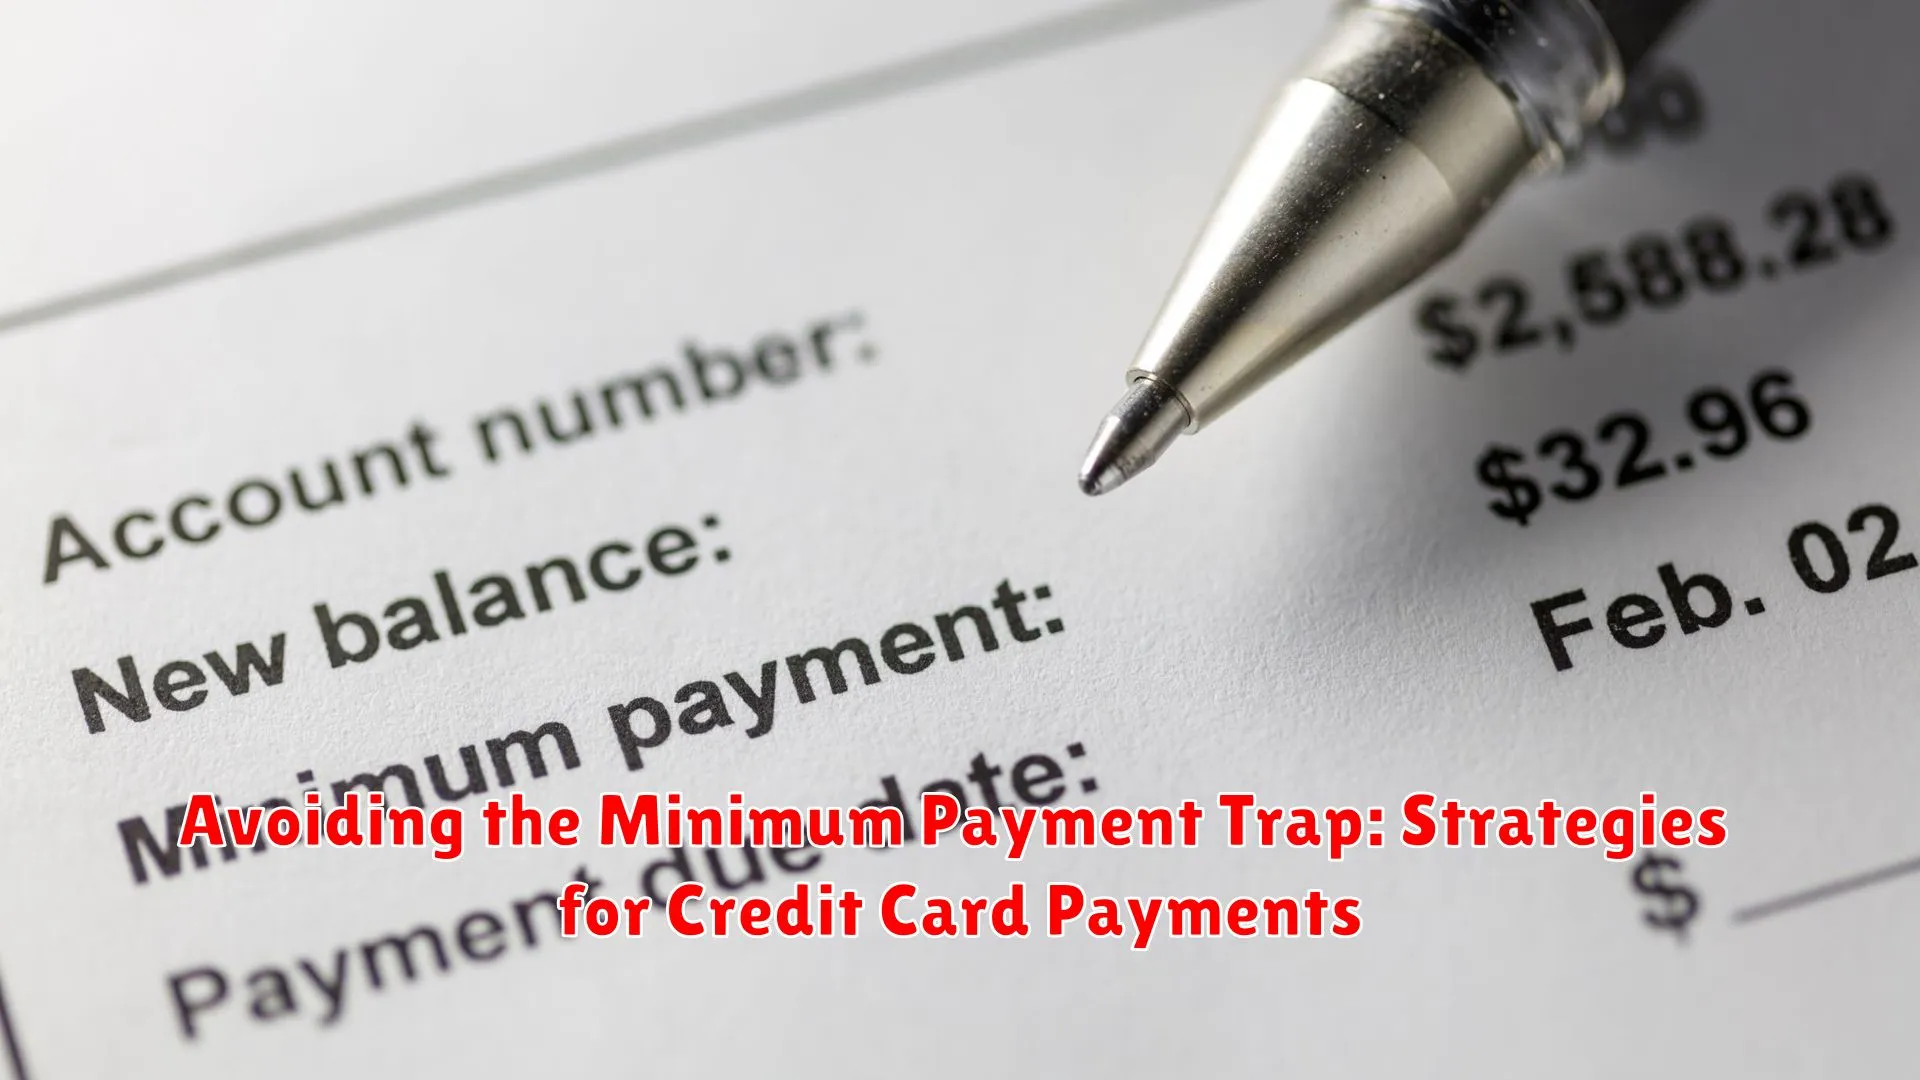 Avoiding the Minimum Payment Trap: Strategies for Credit Card Payments